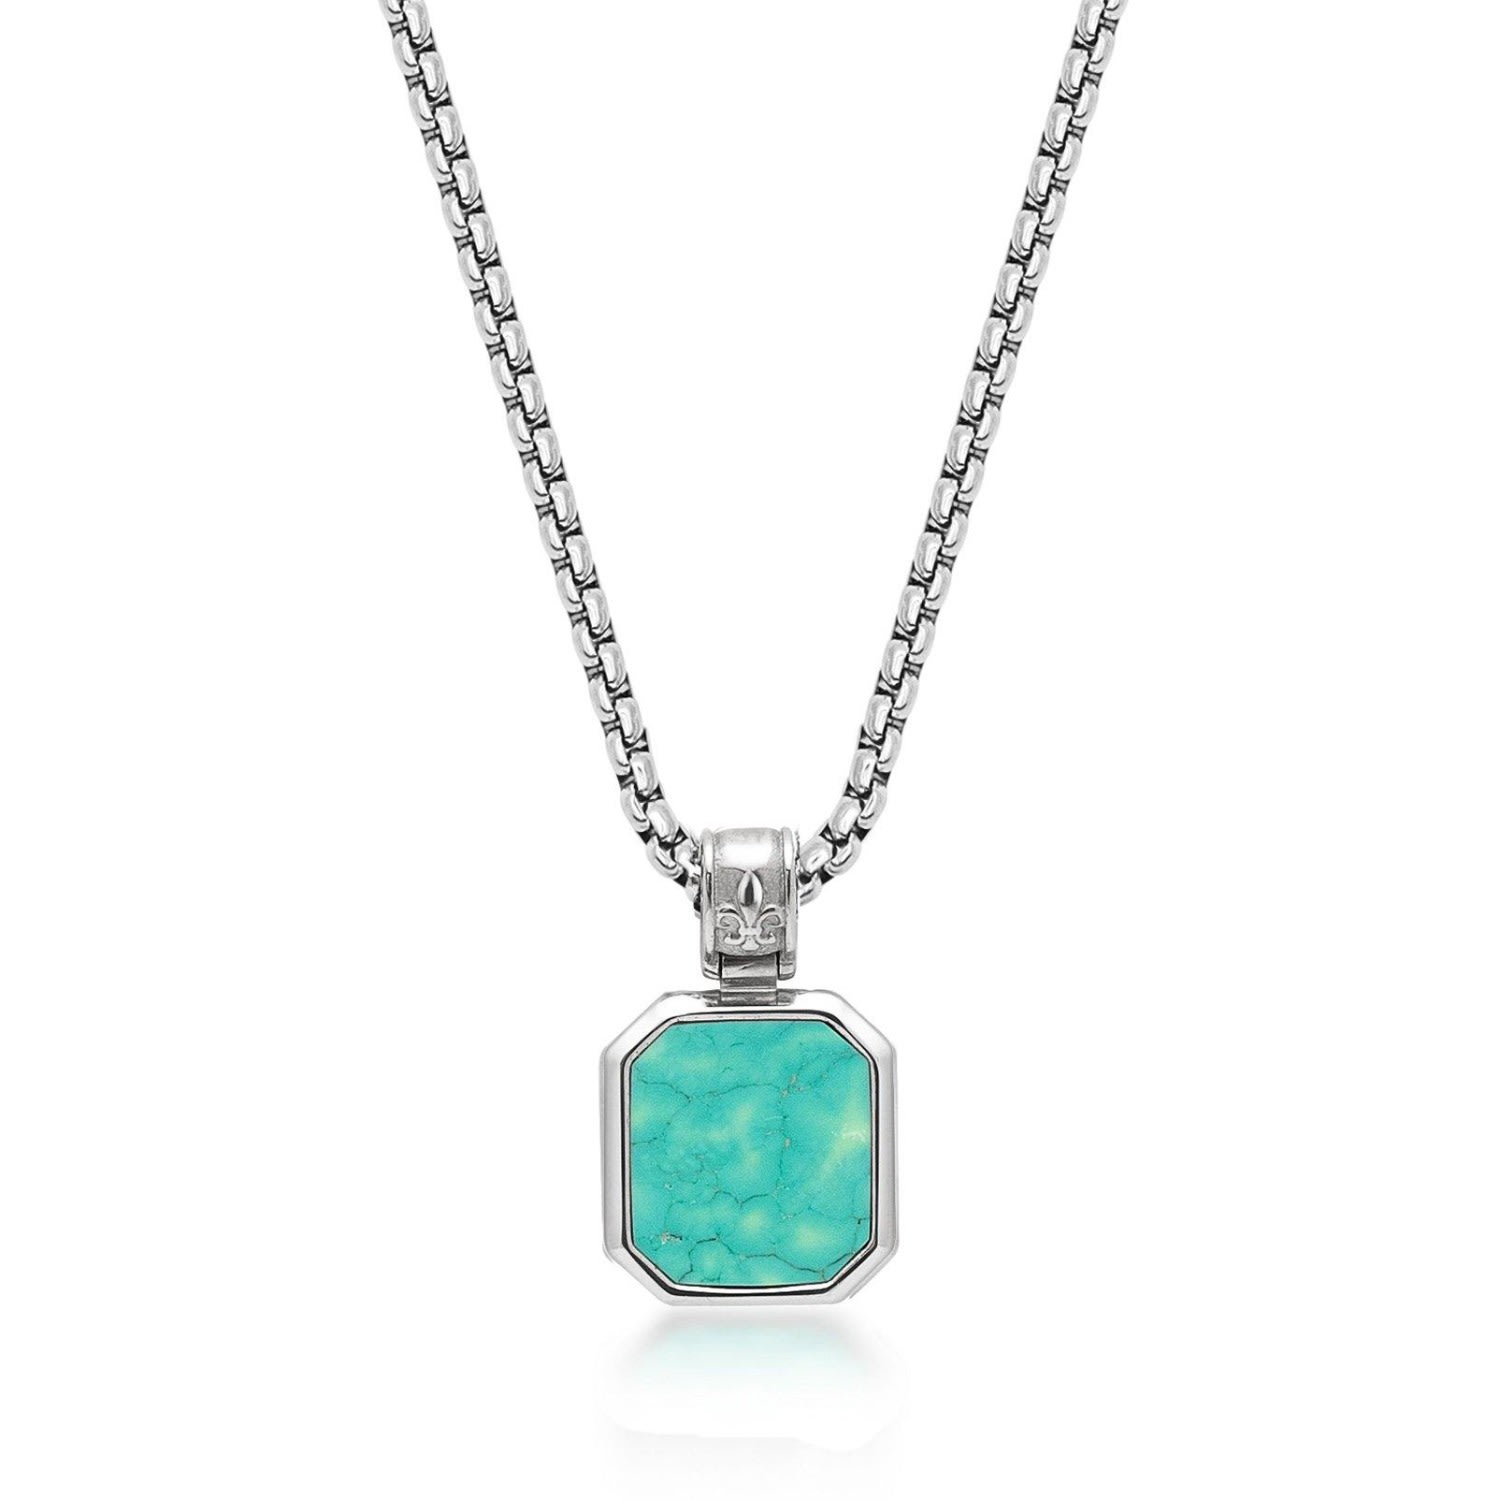 Men's Silver Necklace With Square Turquoise Pendant Nialaya Jewelry